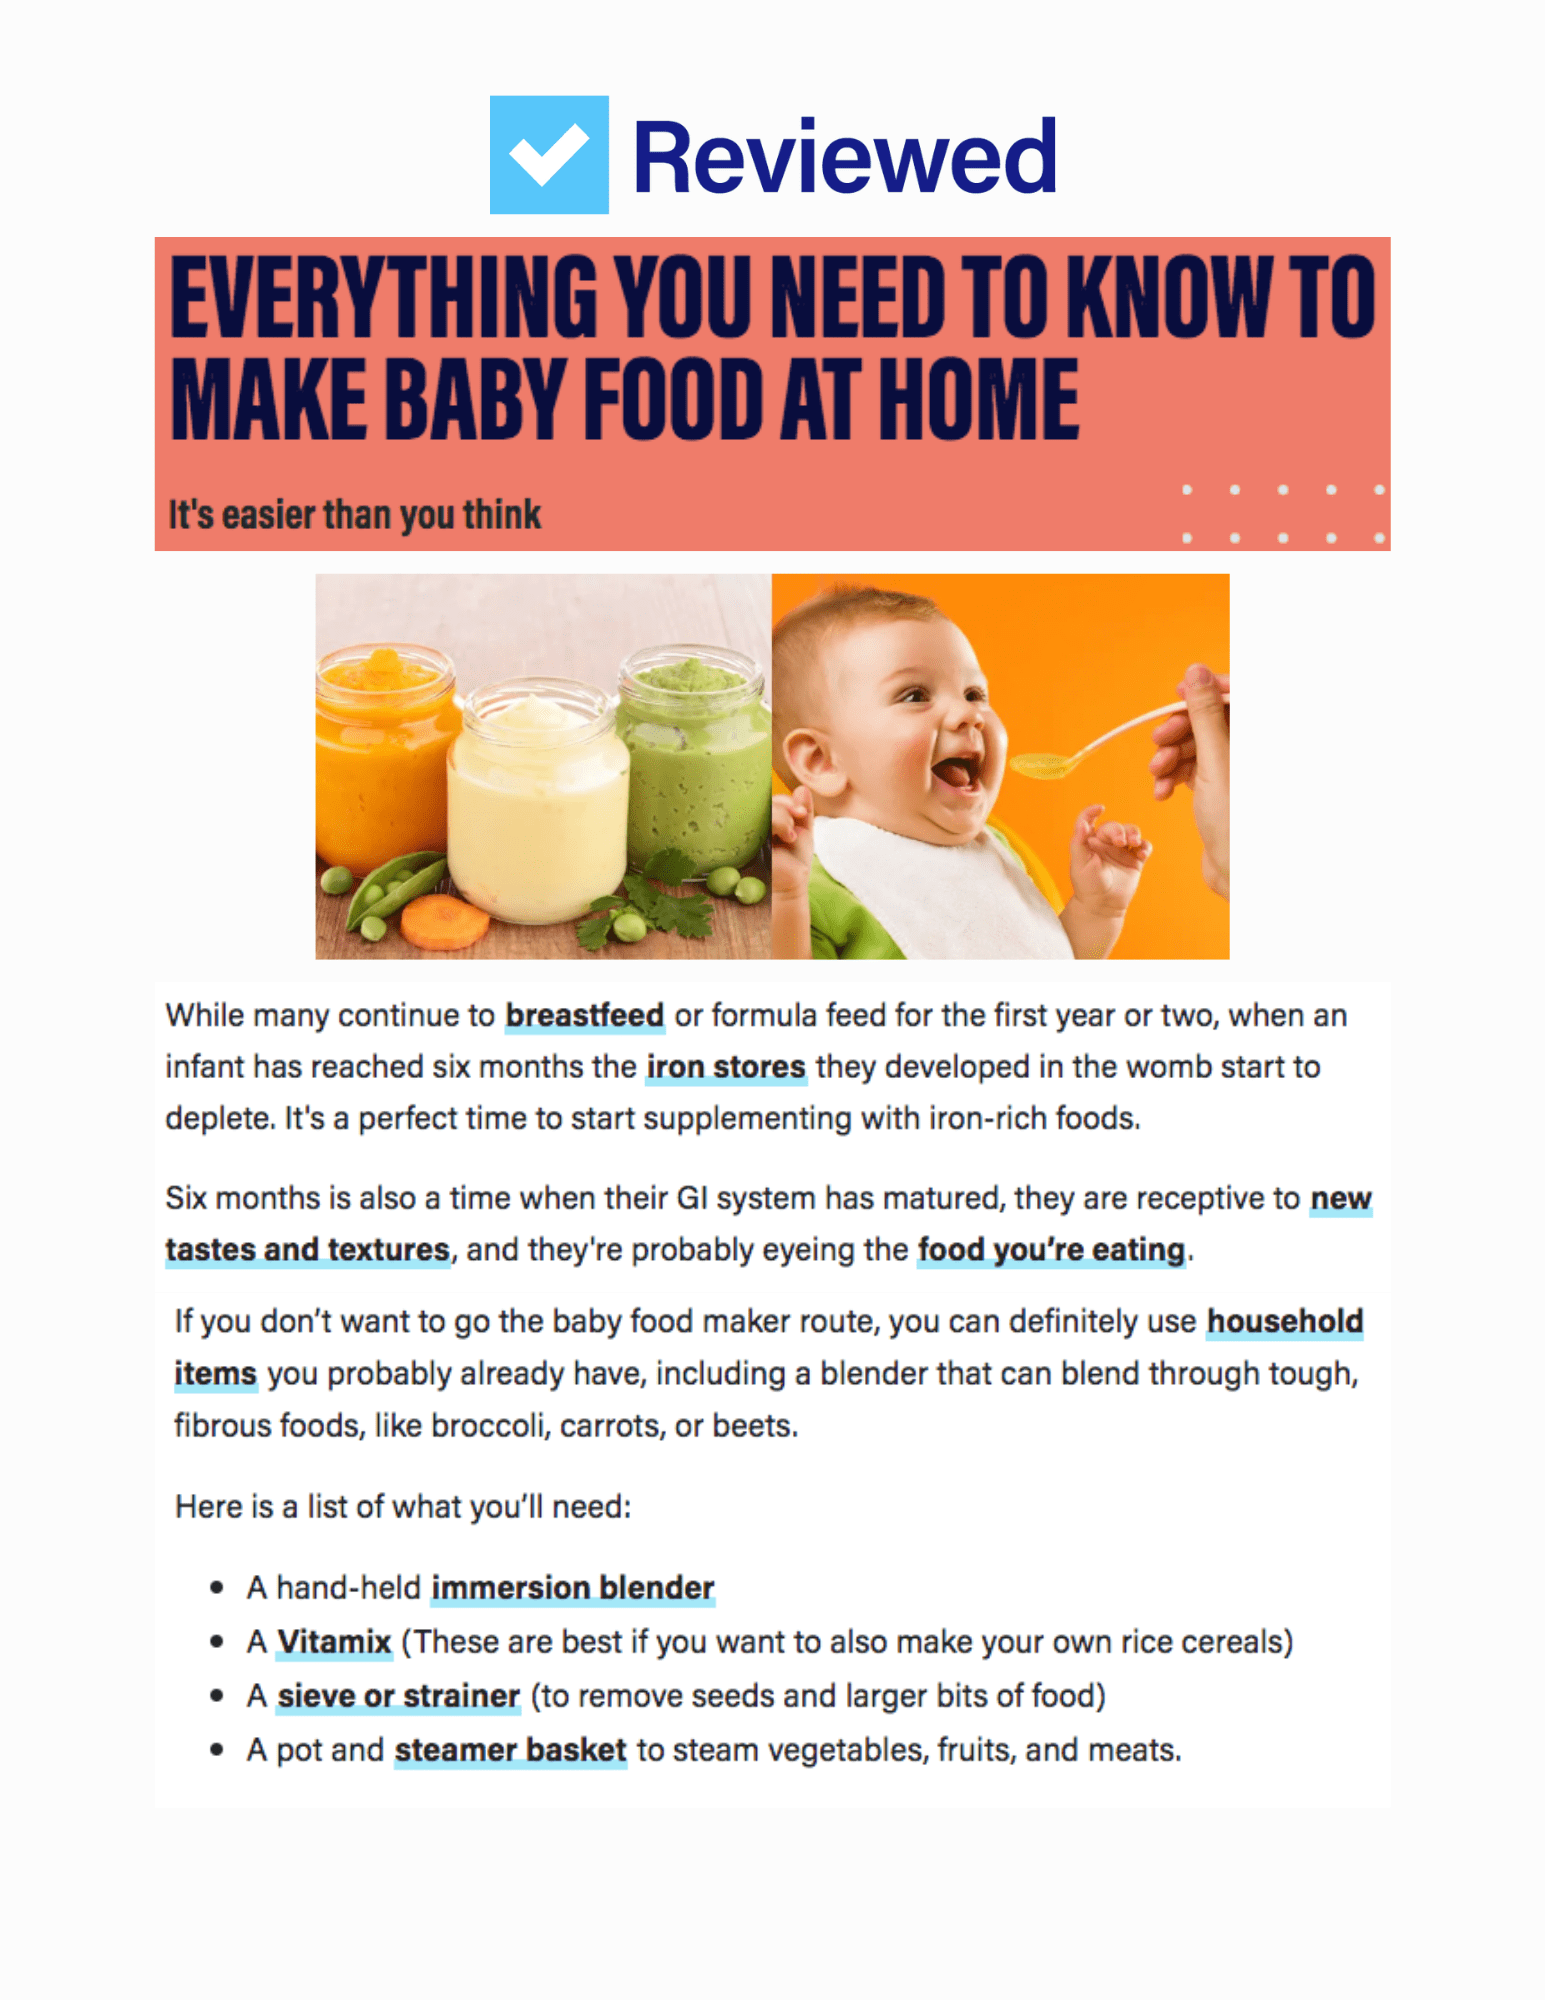 Everything You Need To Know To Make Baby Food At Home
Featured Brands include:Vitamix

Read More